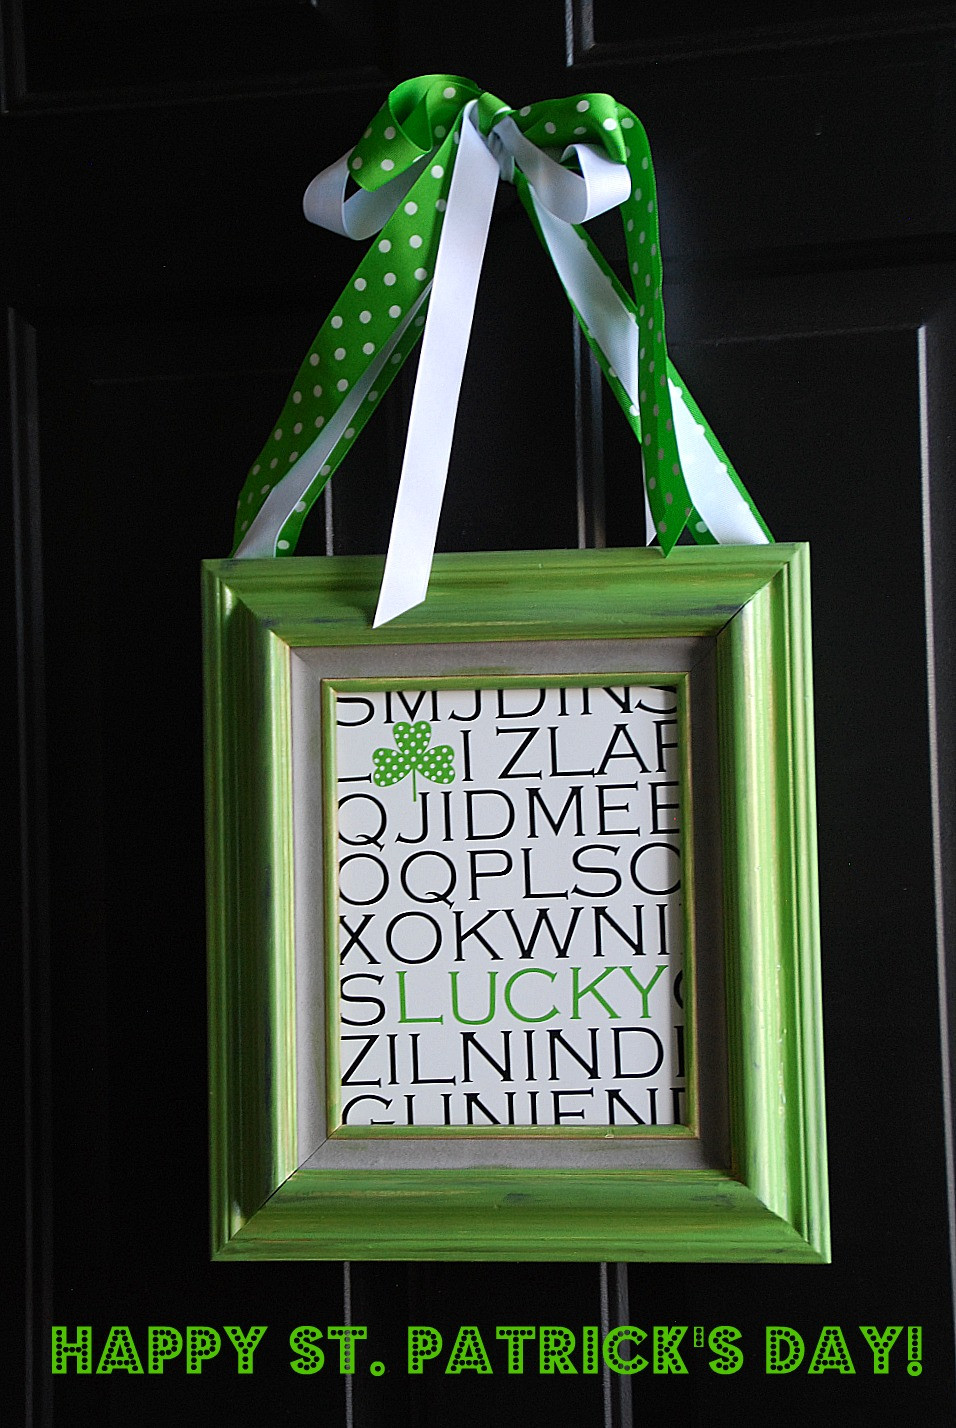 St Patrick's Day Crafts Pinterest
 Quick and Easy St Patrick s Day Craft